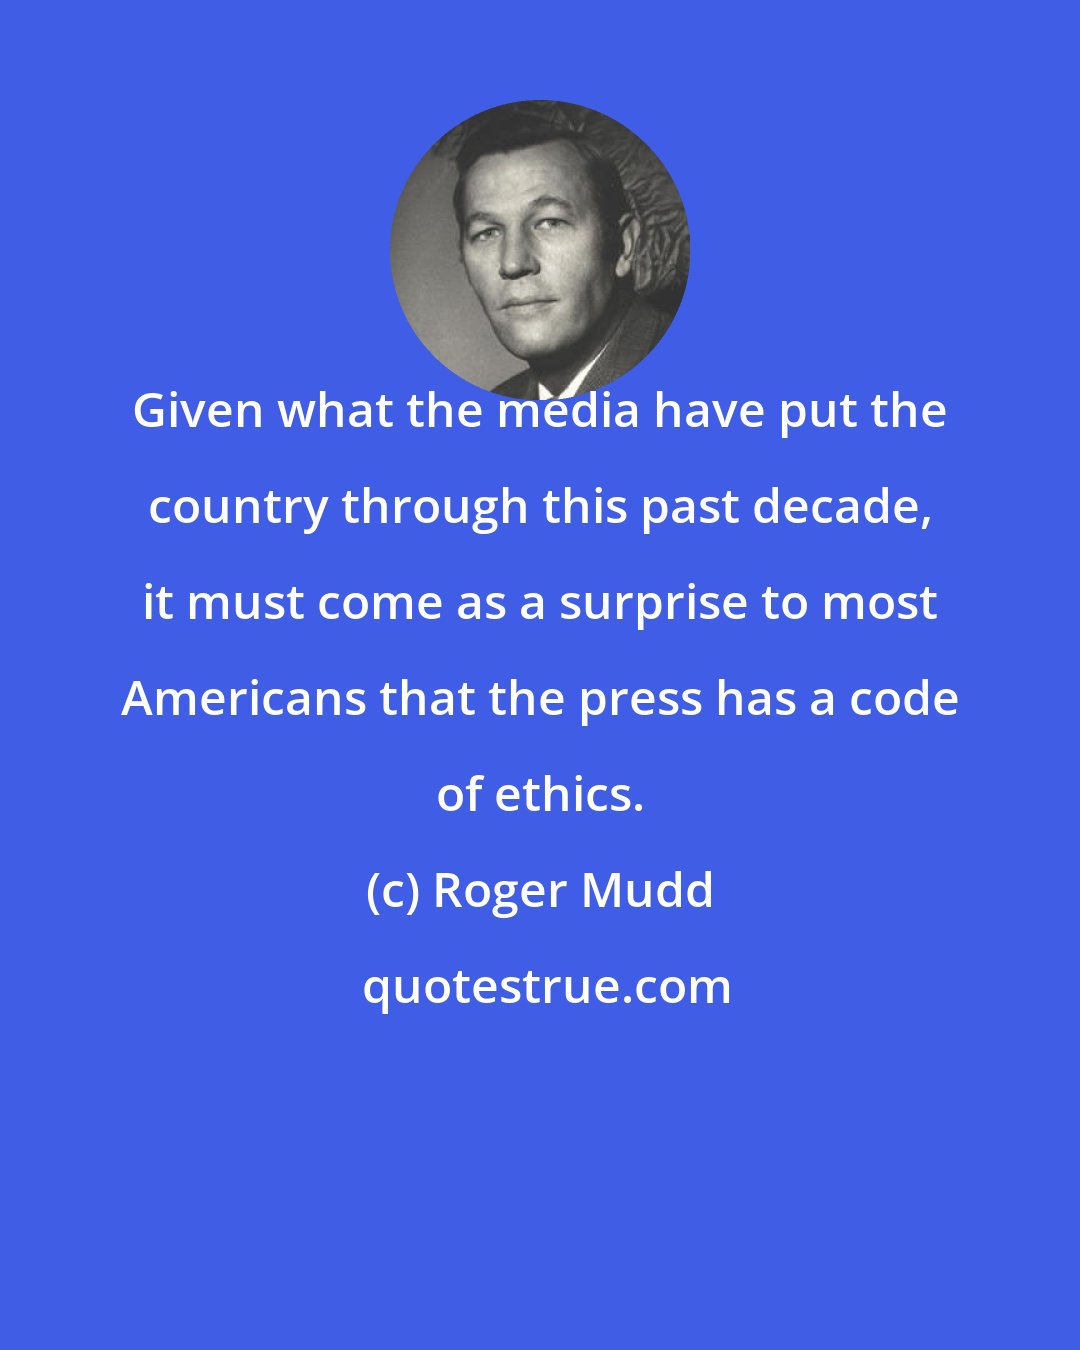 Roger Mudd: Given what the media have put the country through this past decade, it must come as a surprise to most Americans that the press has a code of ethics.